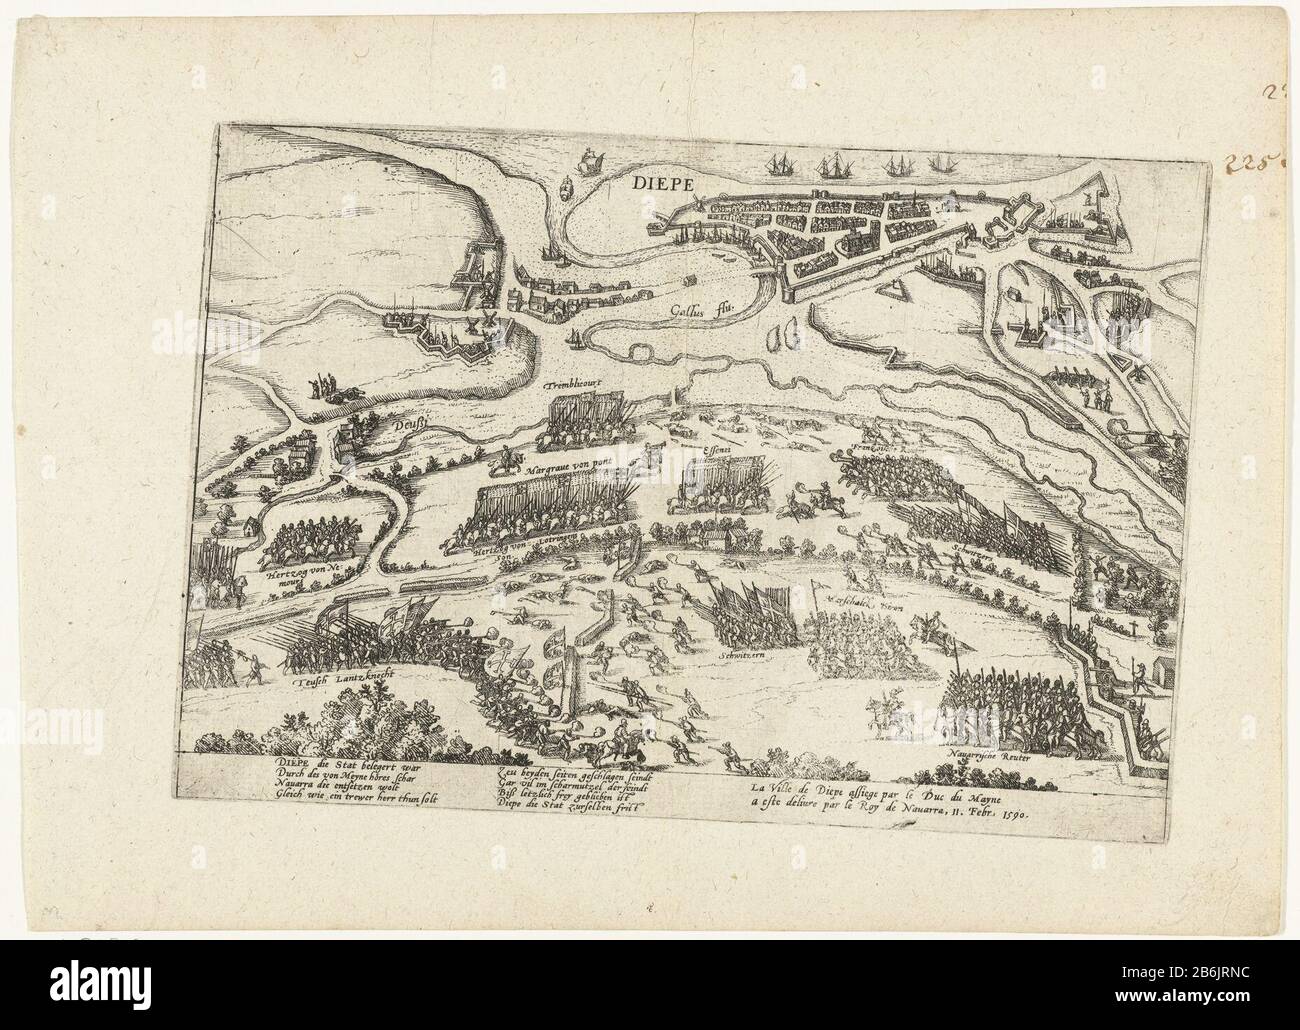 Dieppe freed by Henry IV, 1590 Series 4 French, German and English Events, 1576-1610 (series title) the beleaguered Dieppe appalled by Henry IV, February 11 1590. the battle in the foreground, in the distance a city map Dieppe in overhead view. With signature of 8 lines in German and two lines in French. Unnumbered. Leaf comes from an album that is disassembled. Upper right numbered (in pen) 225. Manufacturer : printmaker French High Mountain (workshop) Place manufacture: Cologne Date: 1590 - 1592 Physical features: etching material: paper Technique: etching Dimensions: plate edge: H 210 mm × Stock Photo